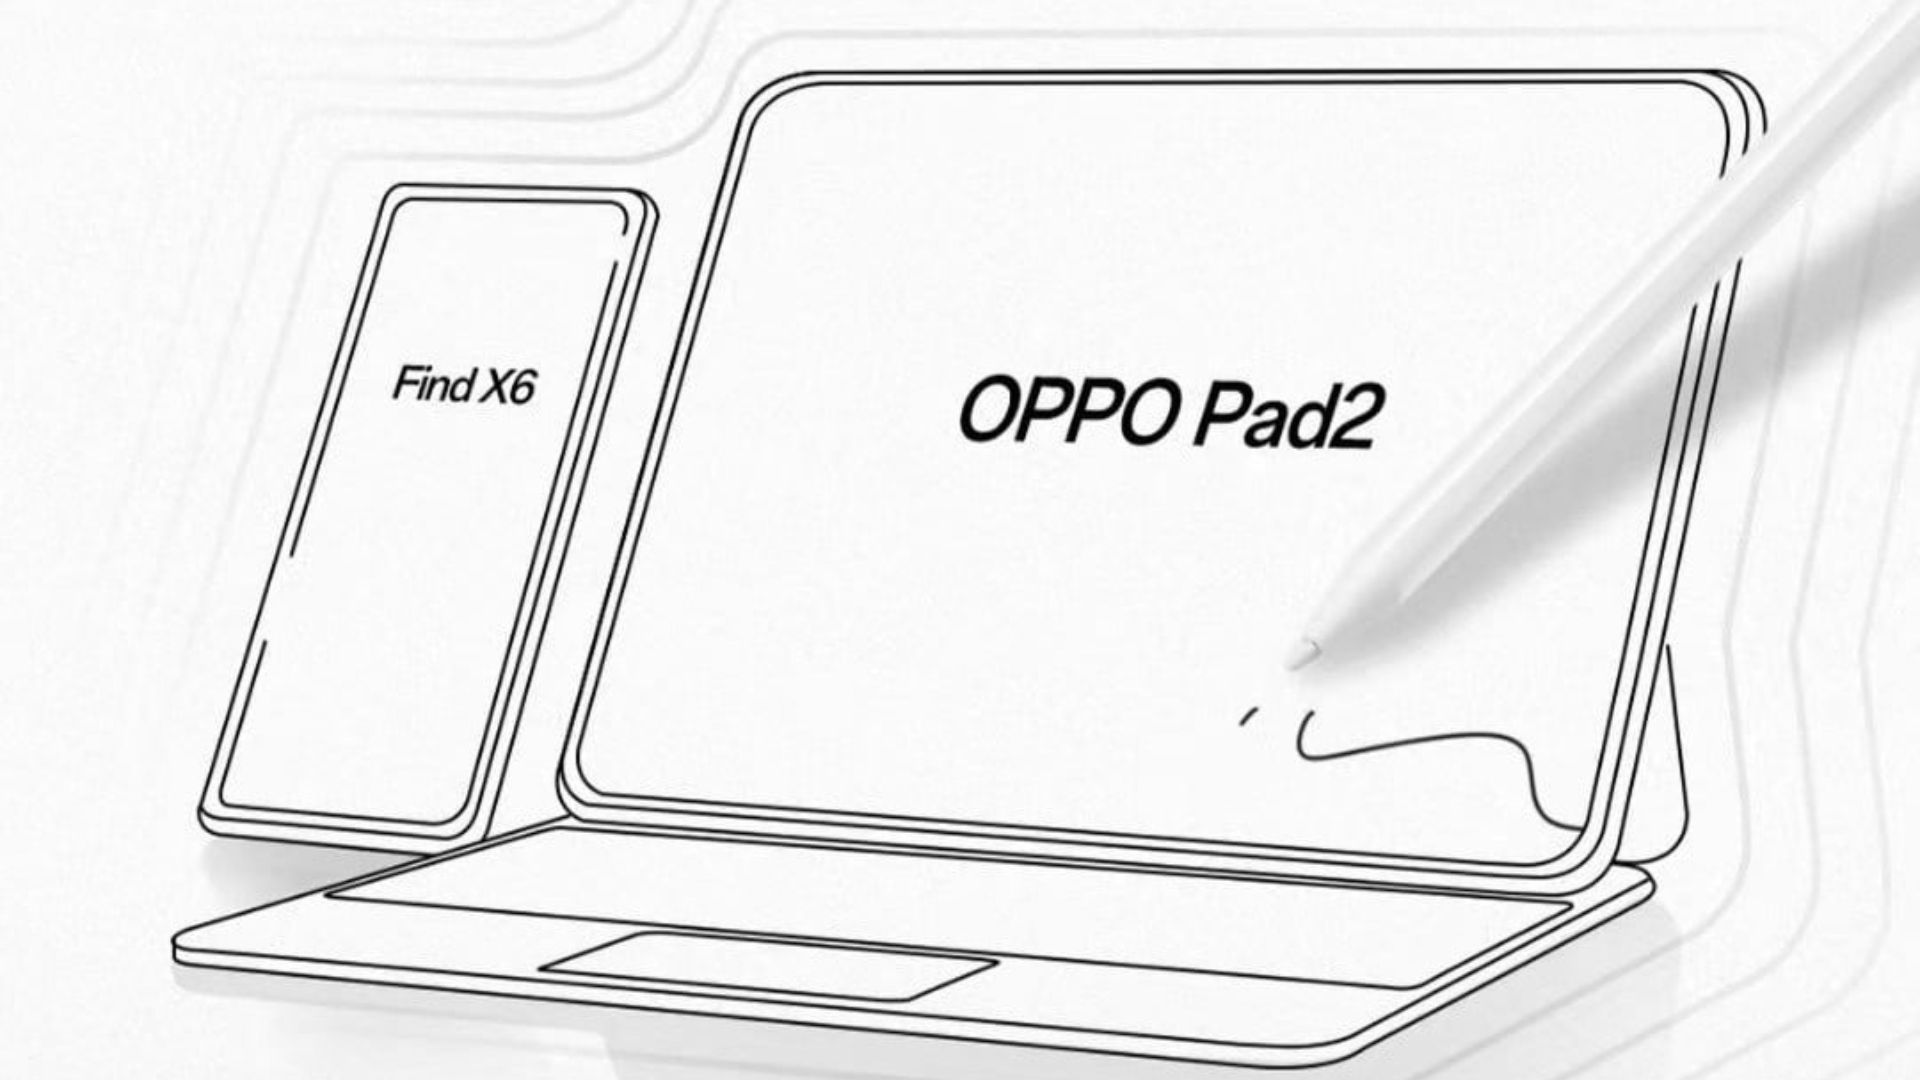 OPPO Pad 2 keyboard and stylus